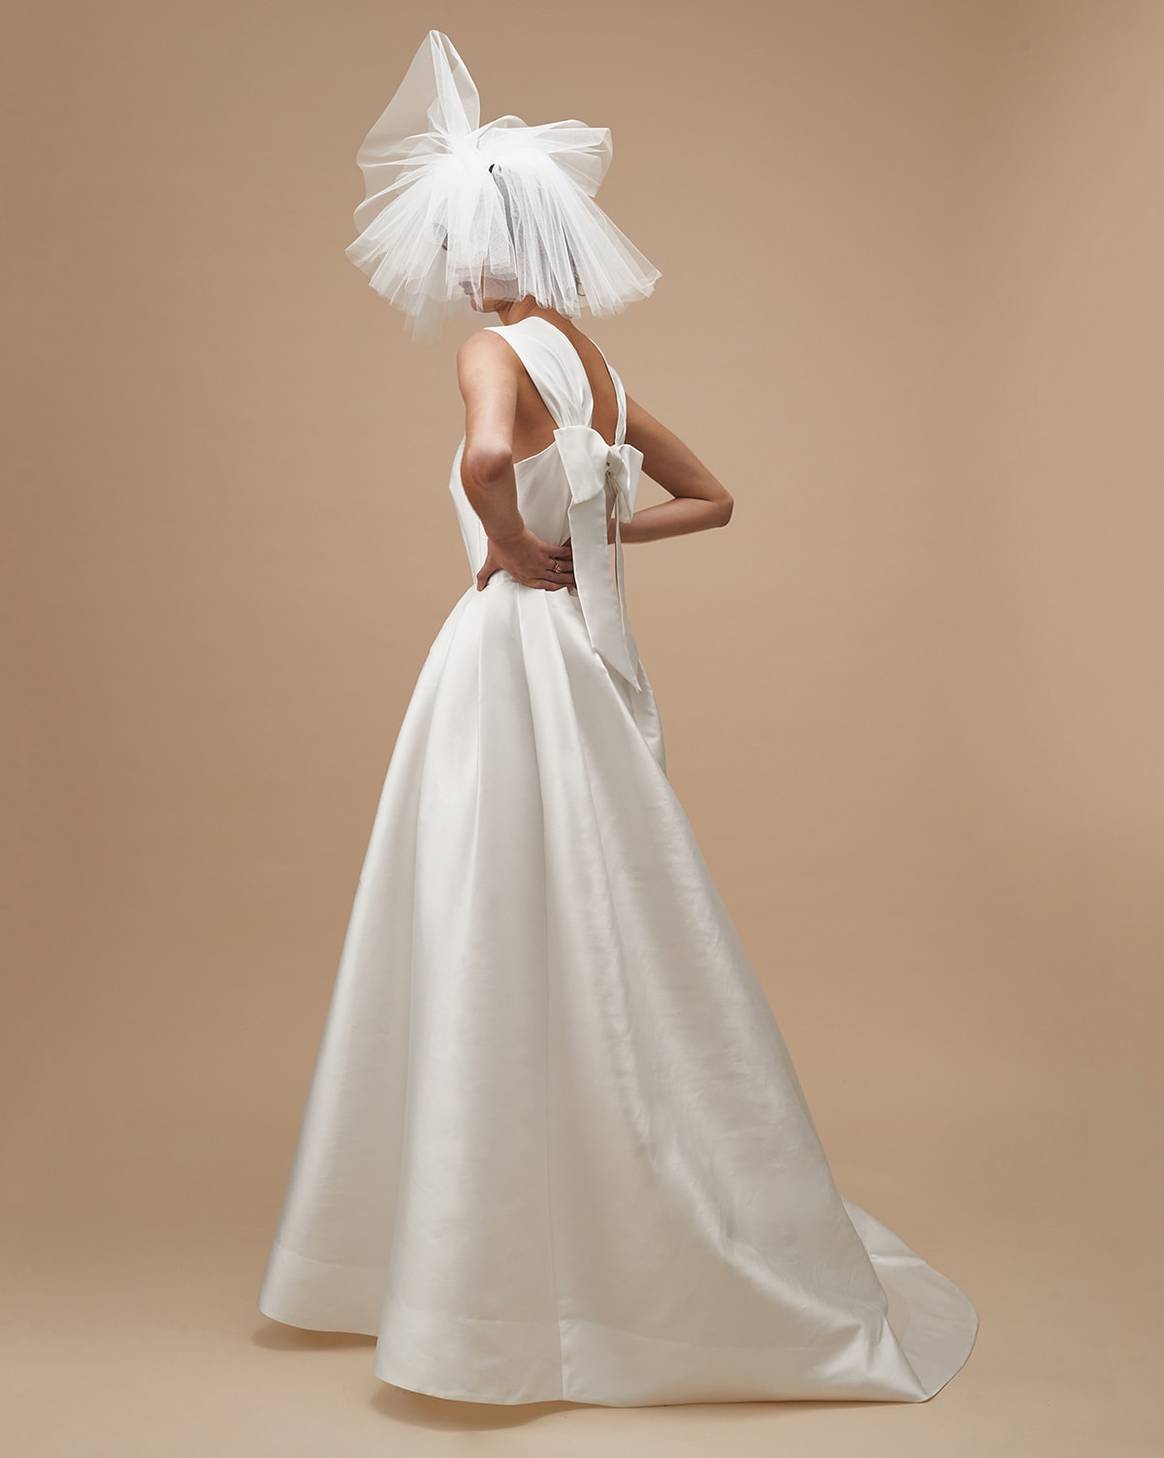 Karen Walker debuts bespoke bridal atelier for gowns and jewelry